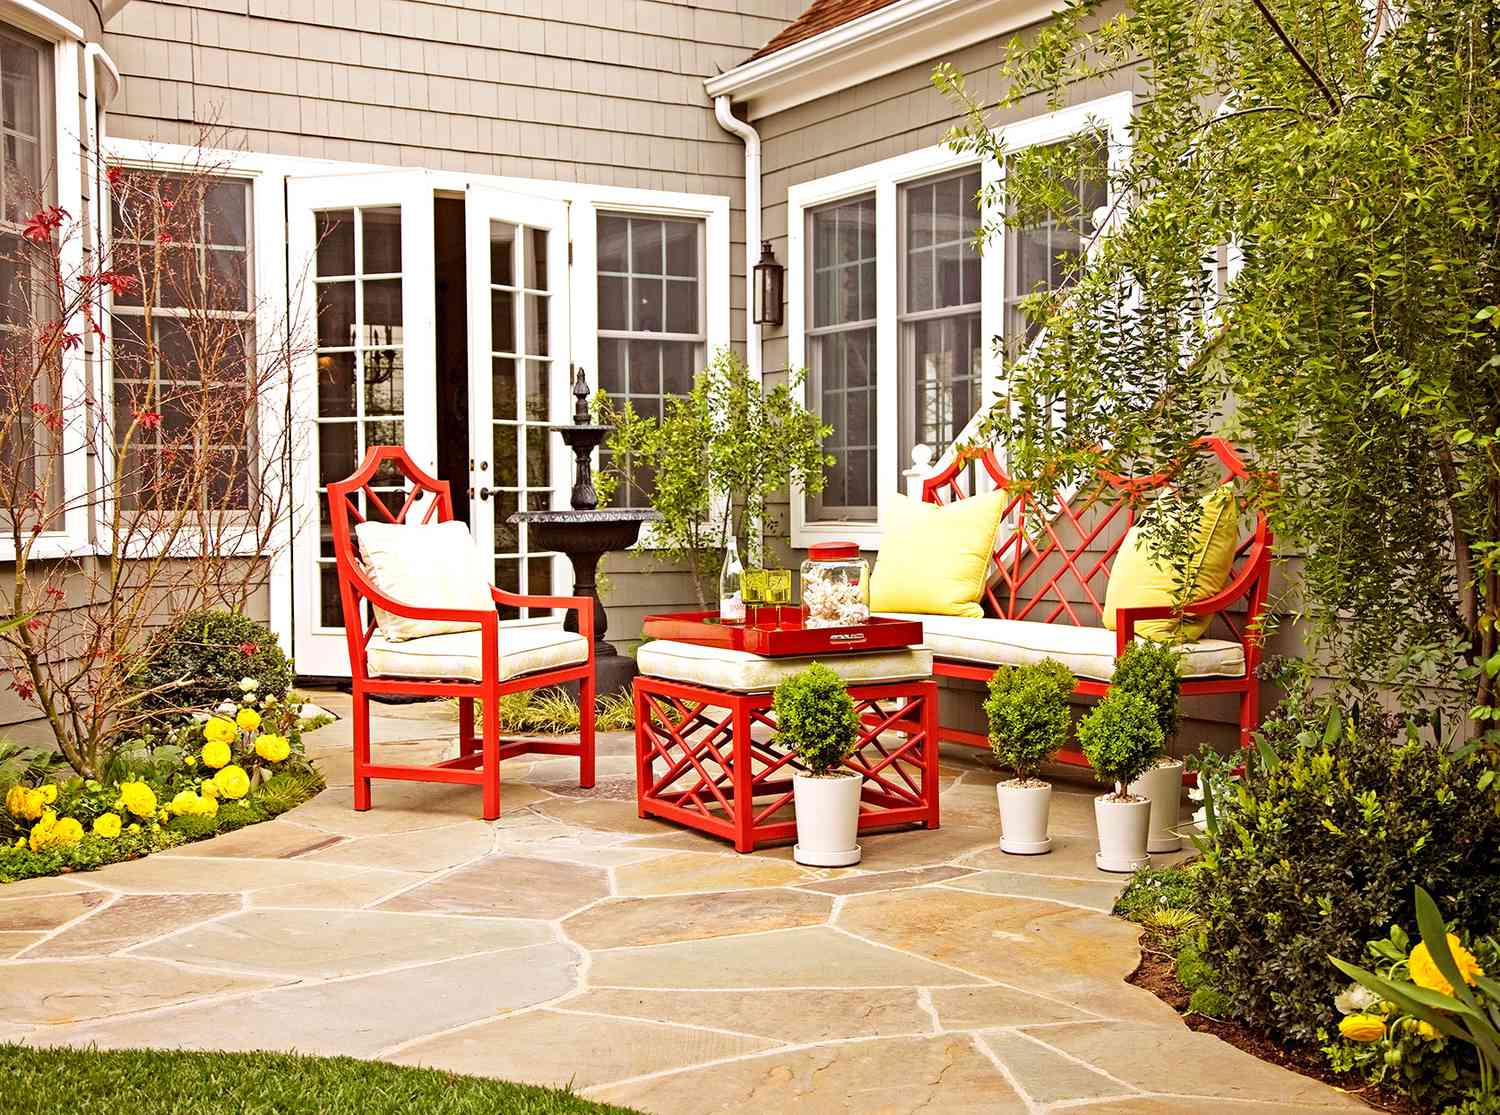 Outdoor seating with stone patio and red seating